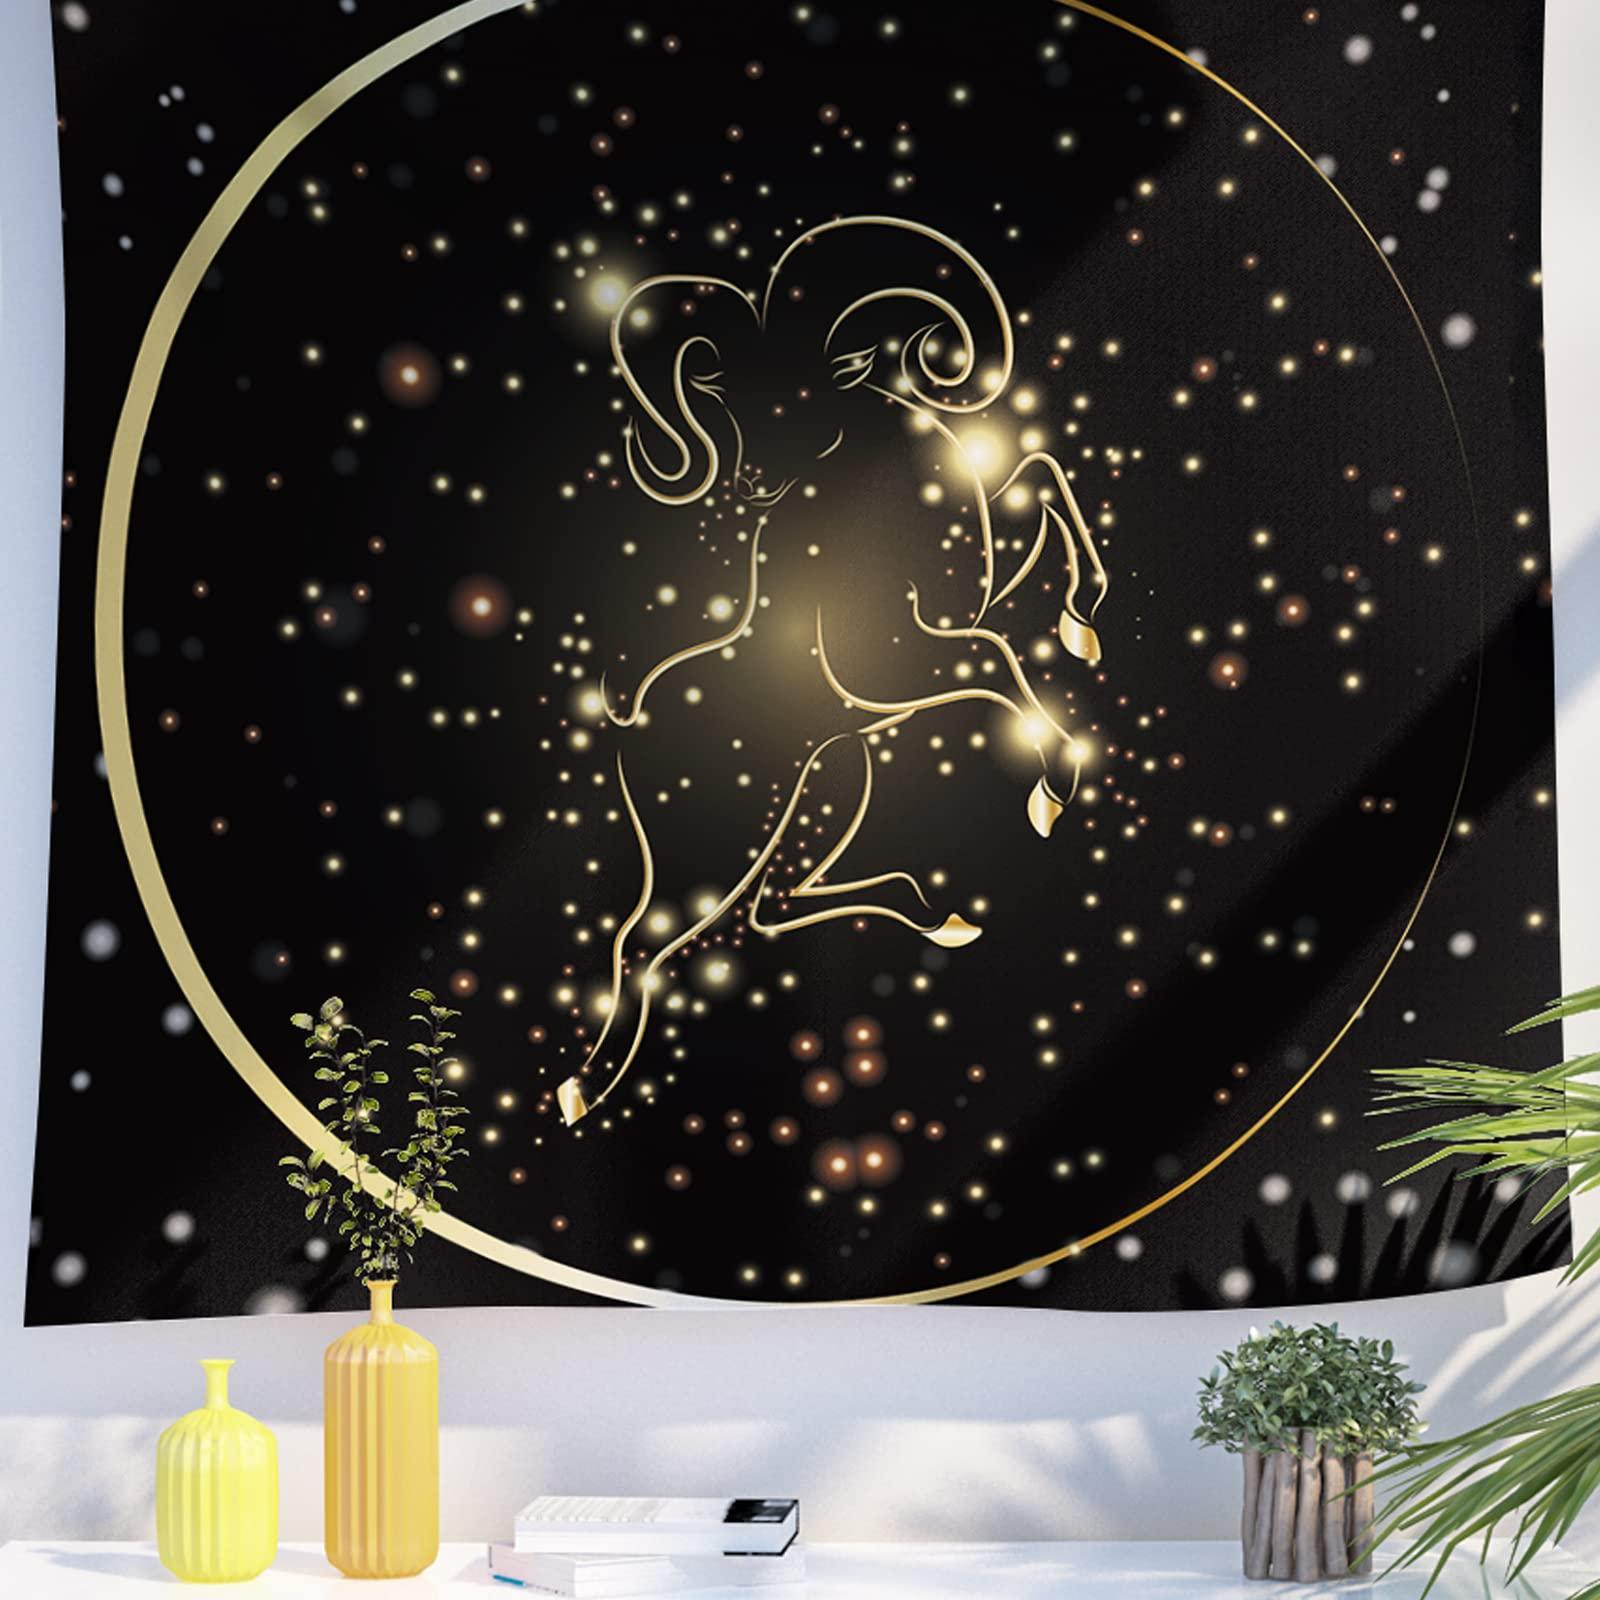 Berkin Arts Decor Tapestry for Wall Hanging Premium Polyester Fabric Backdrop Space Art Ornate Galactic Gold Gemini Gold Cloth Goddess Art 59.1 x 78.7 Inch